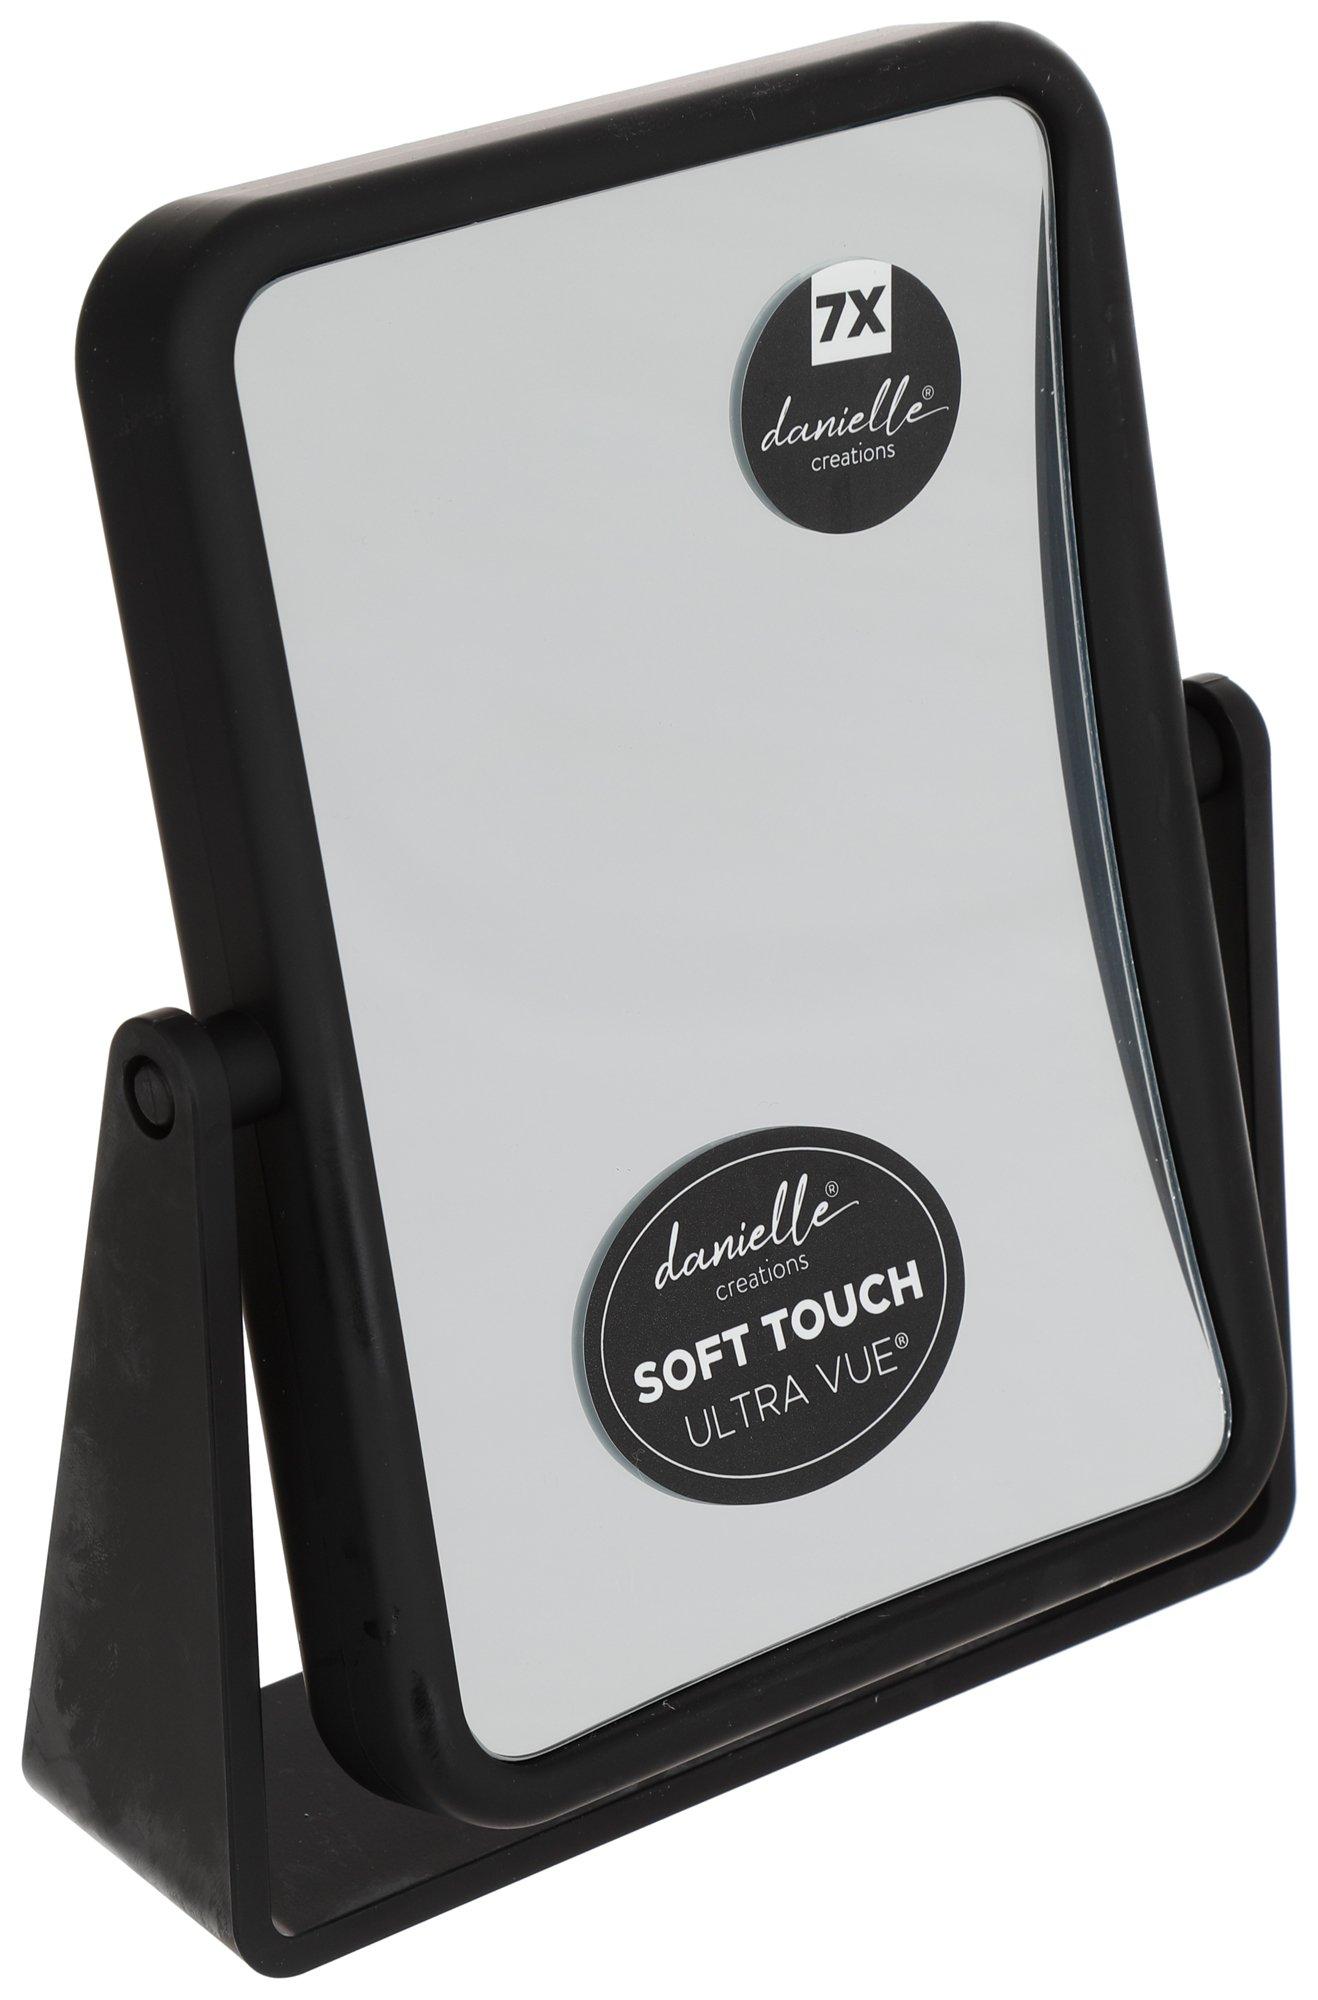 Double-Sided Soft Touch Ultra View Vanity Mirror